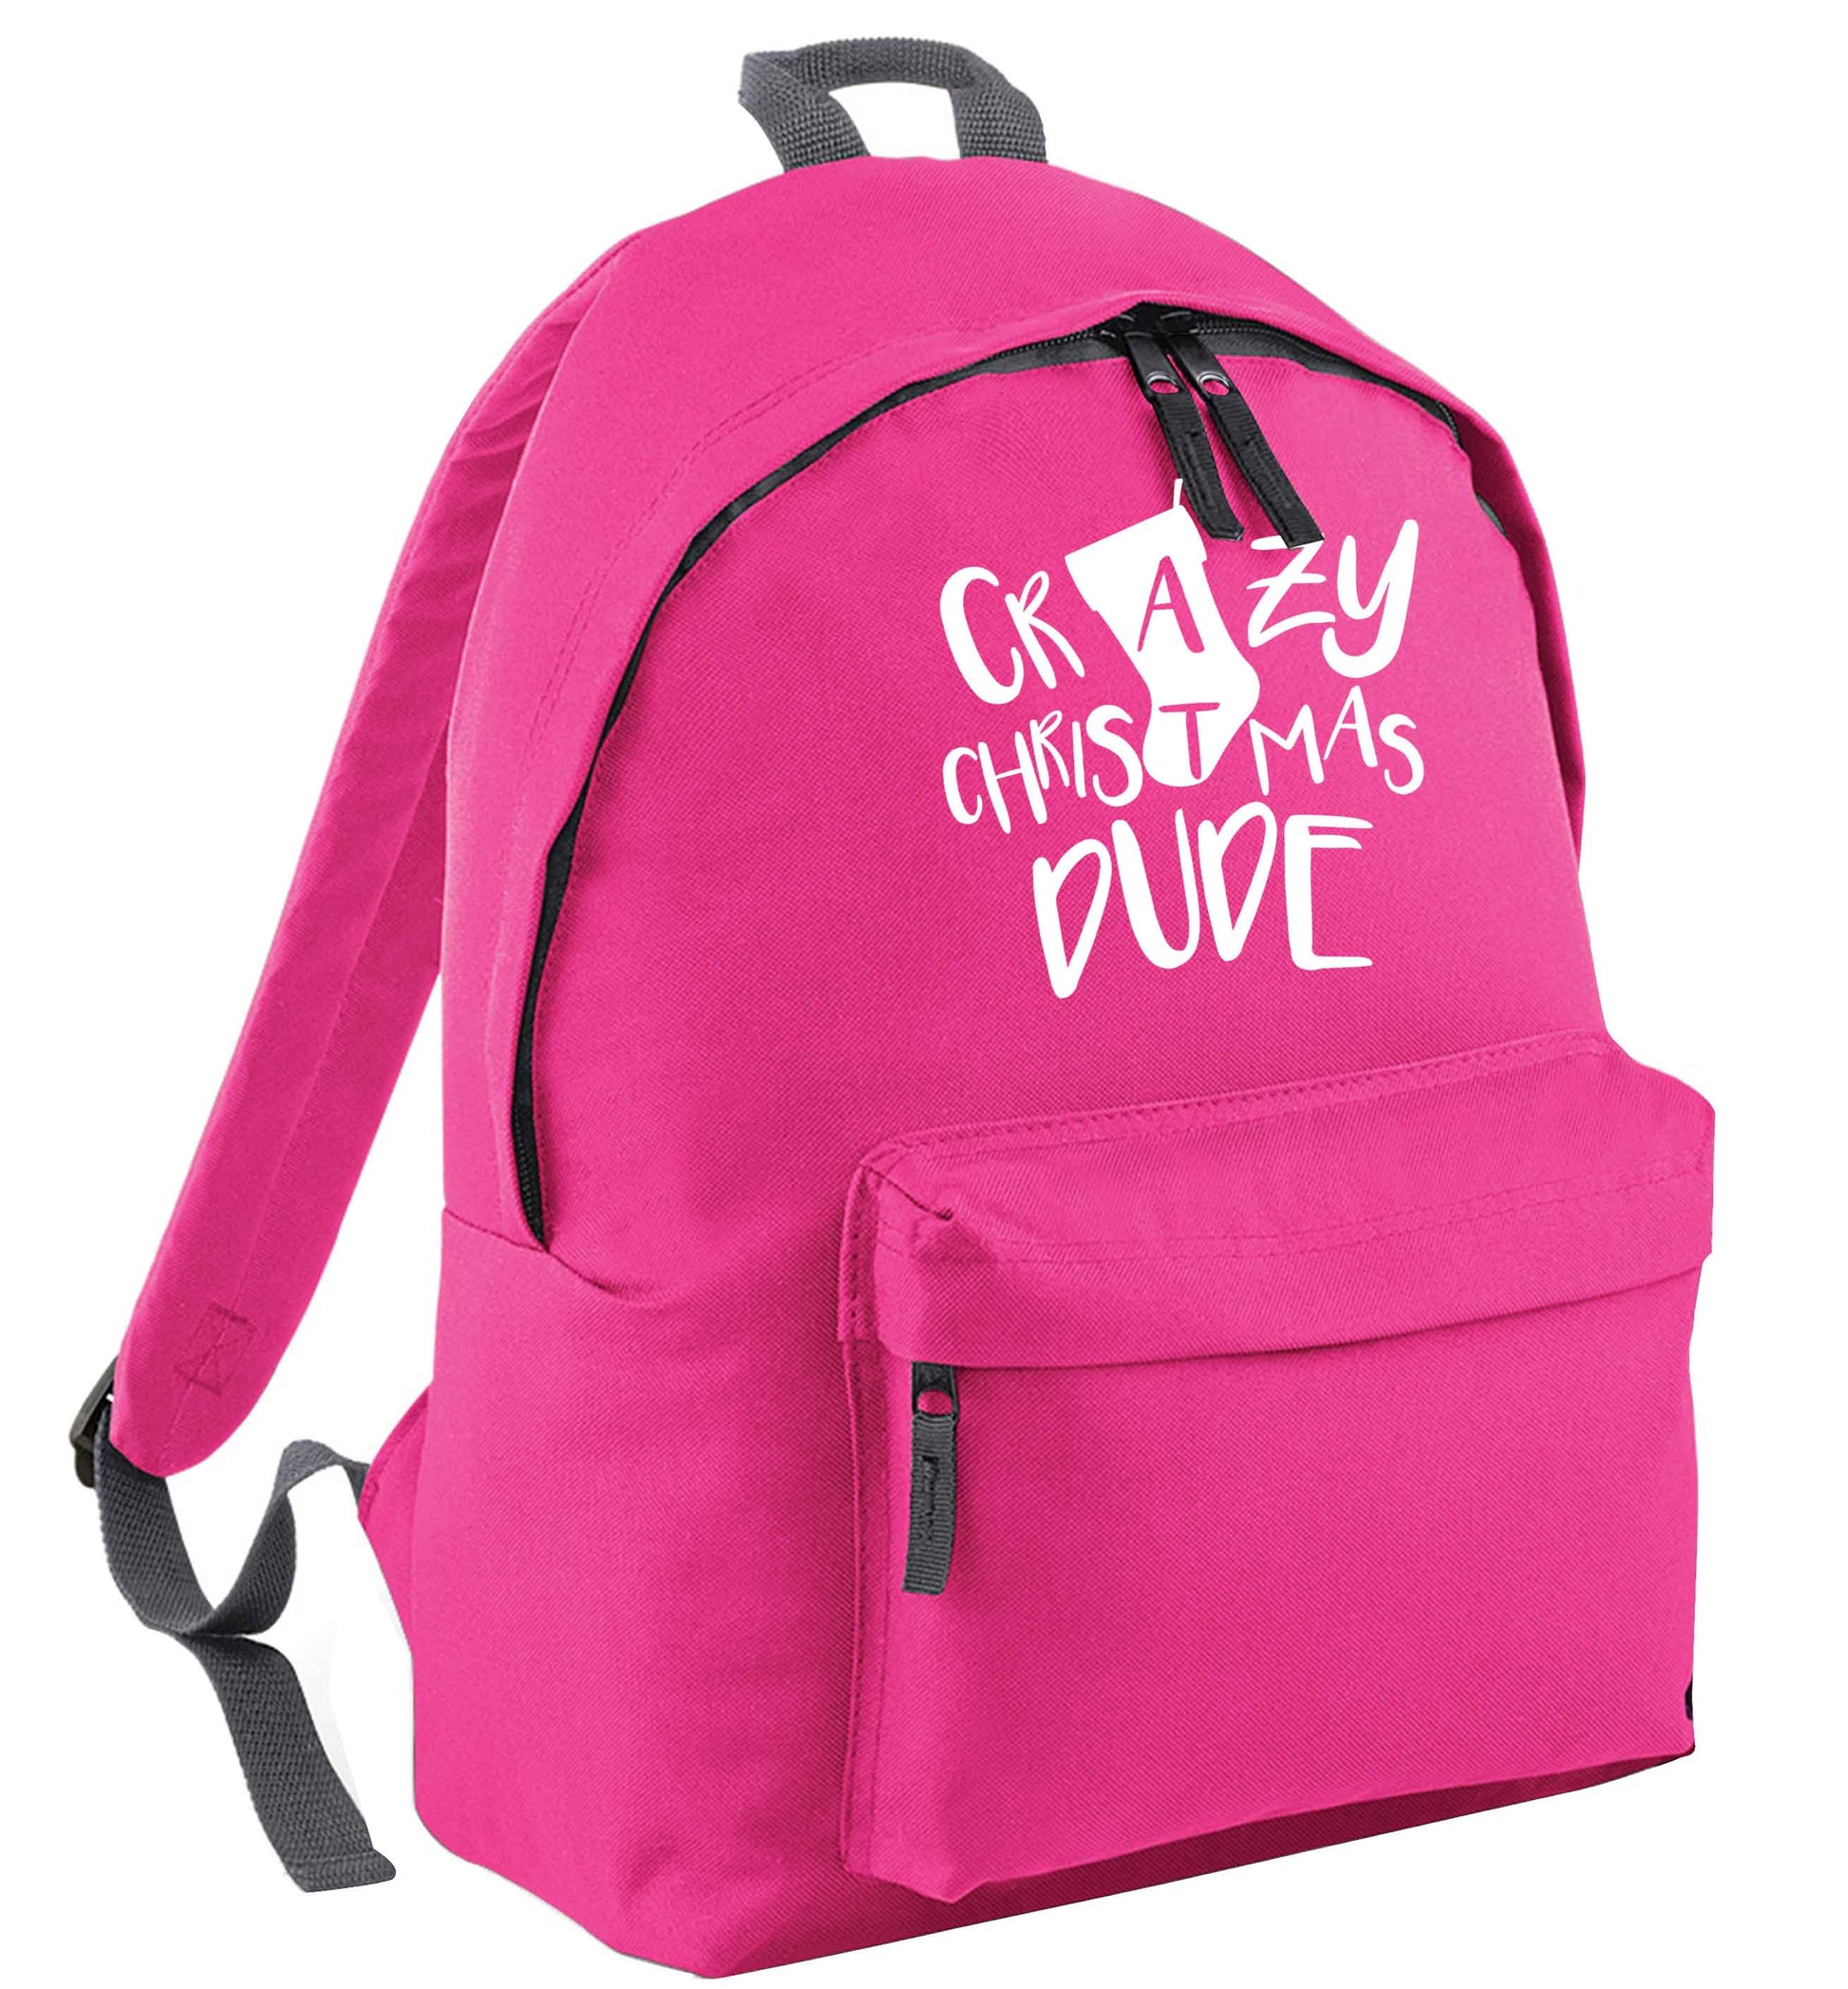 Crazy Christmas Dude pink adults backpack